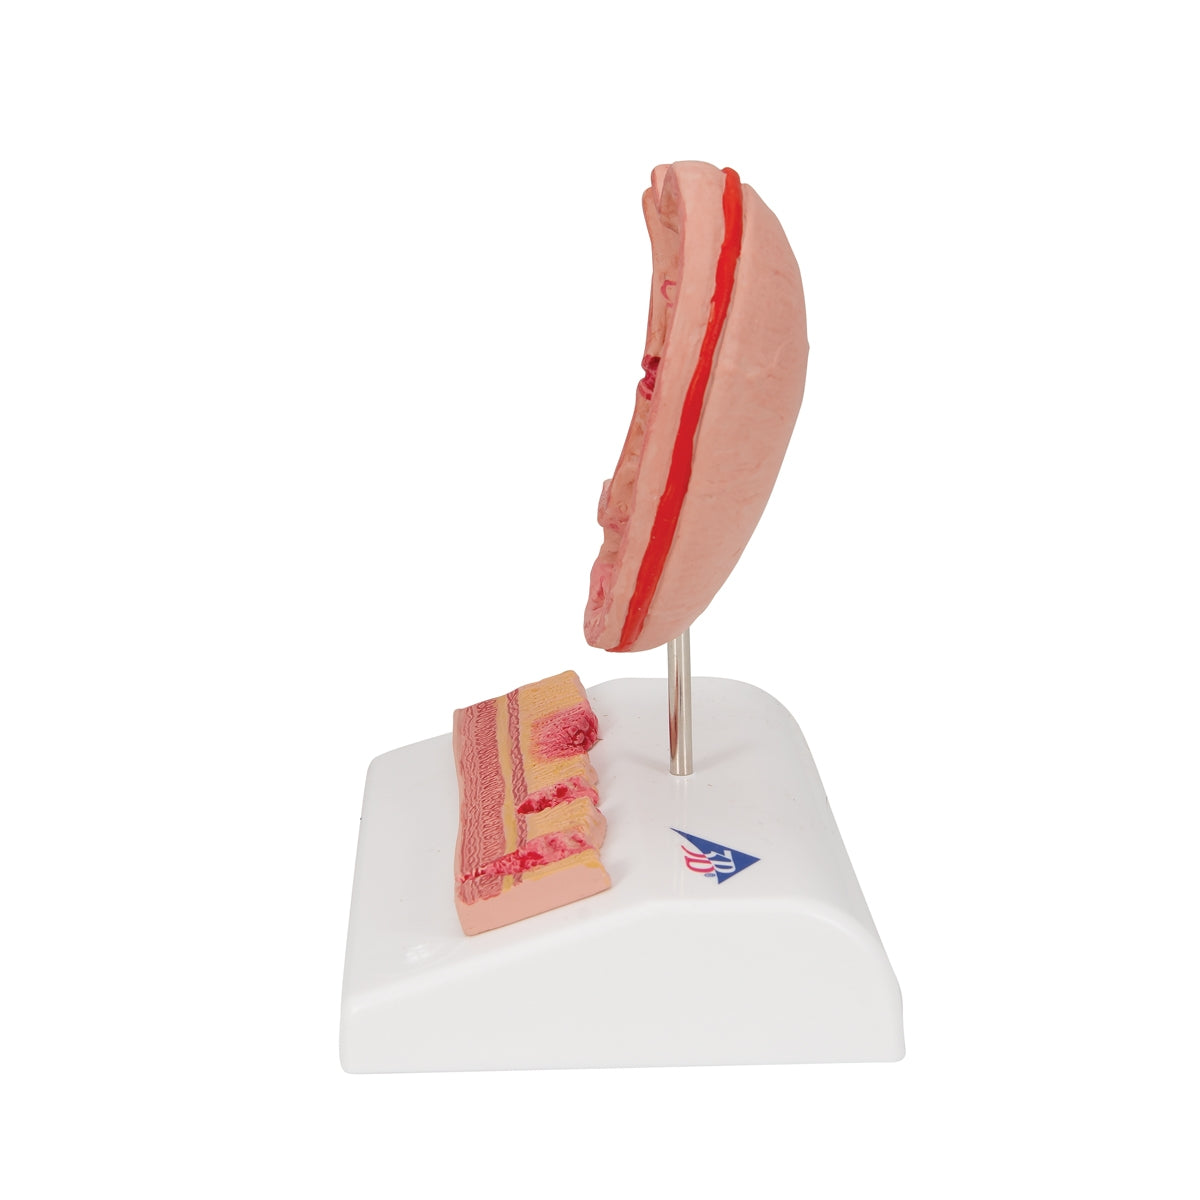 Human Stomach Section Model with Ulcers